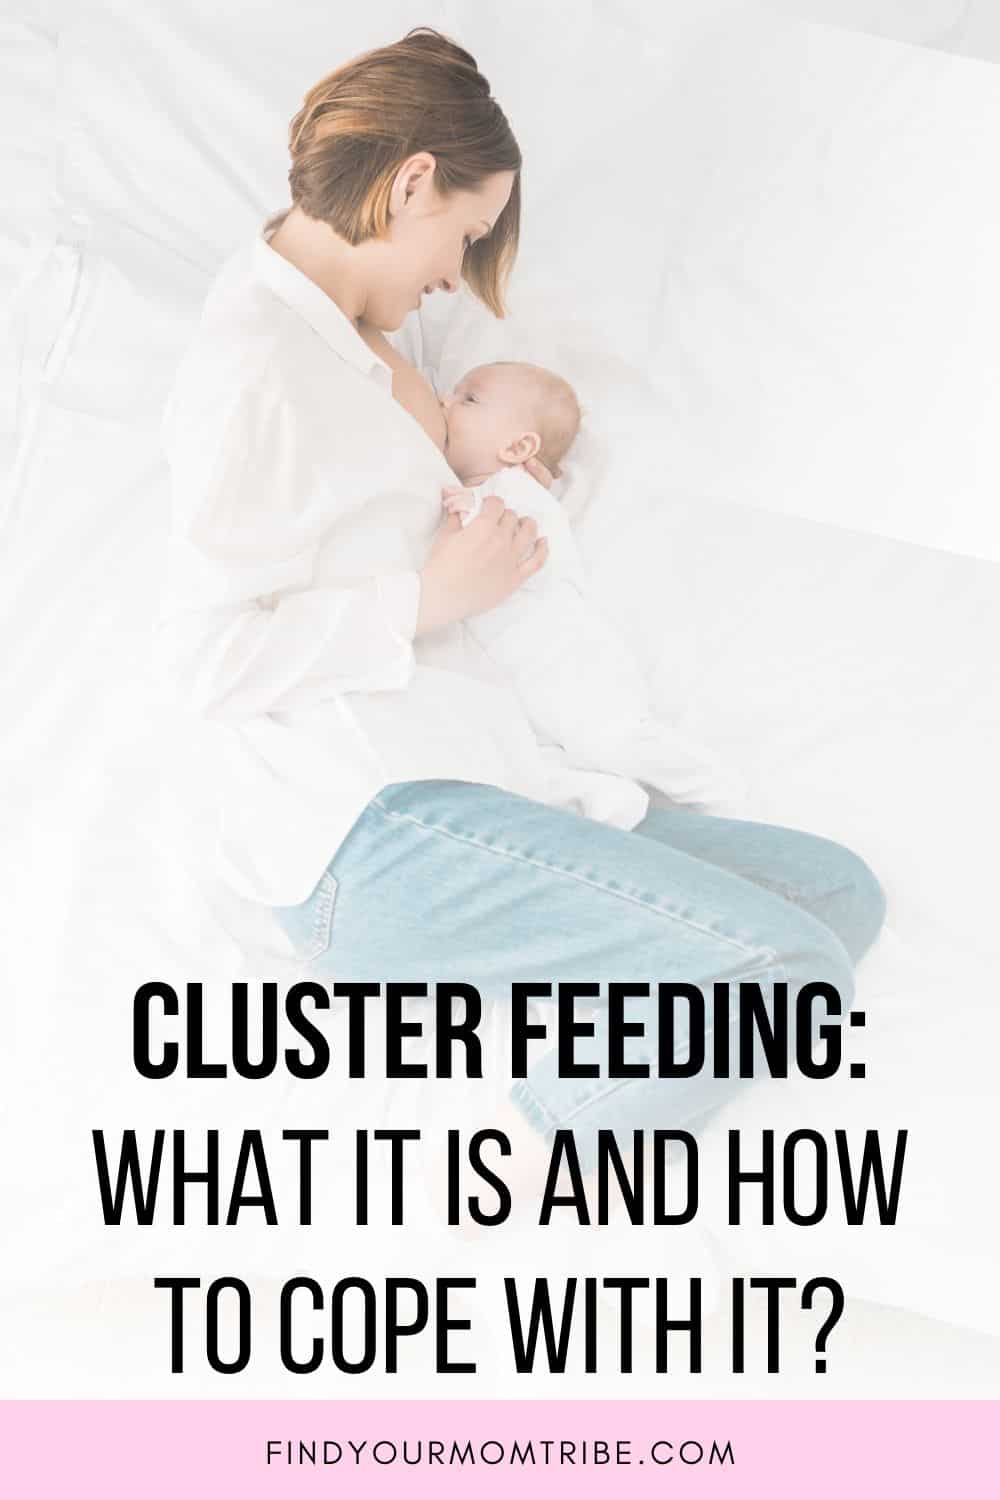 Cluster Feeding: What It Is And How To Cope With It?